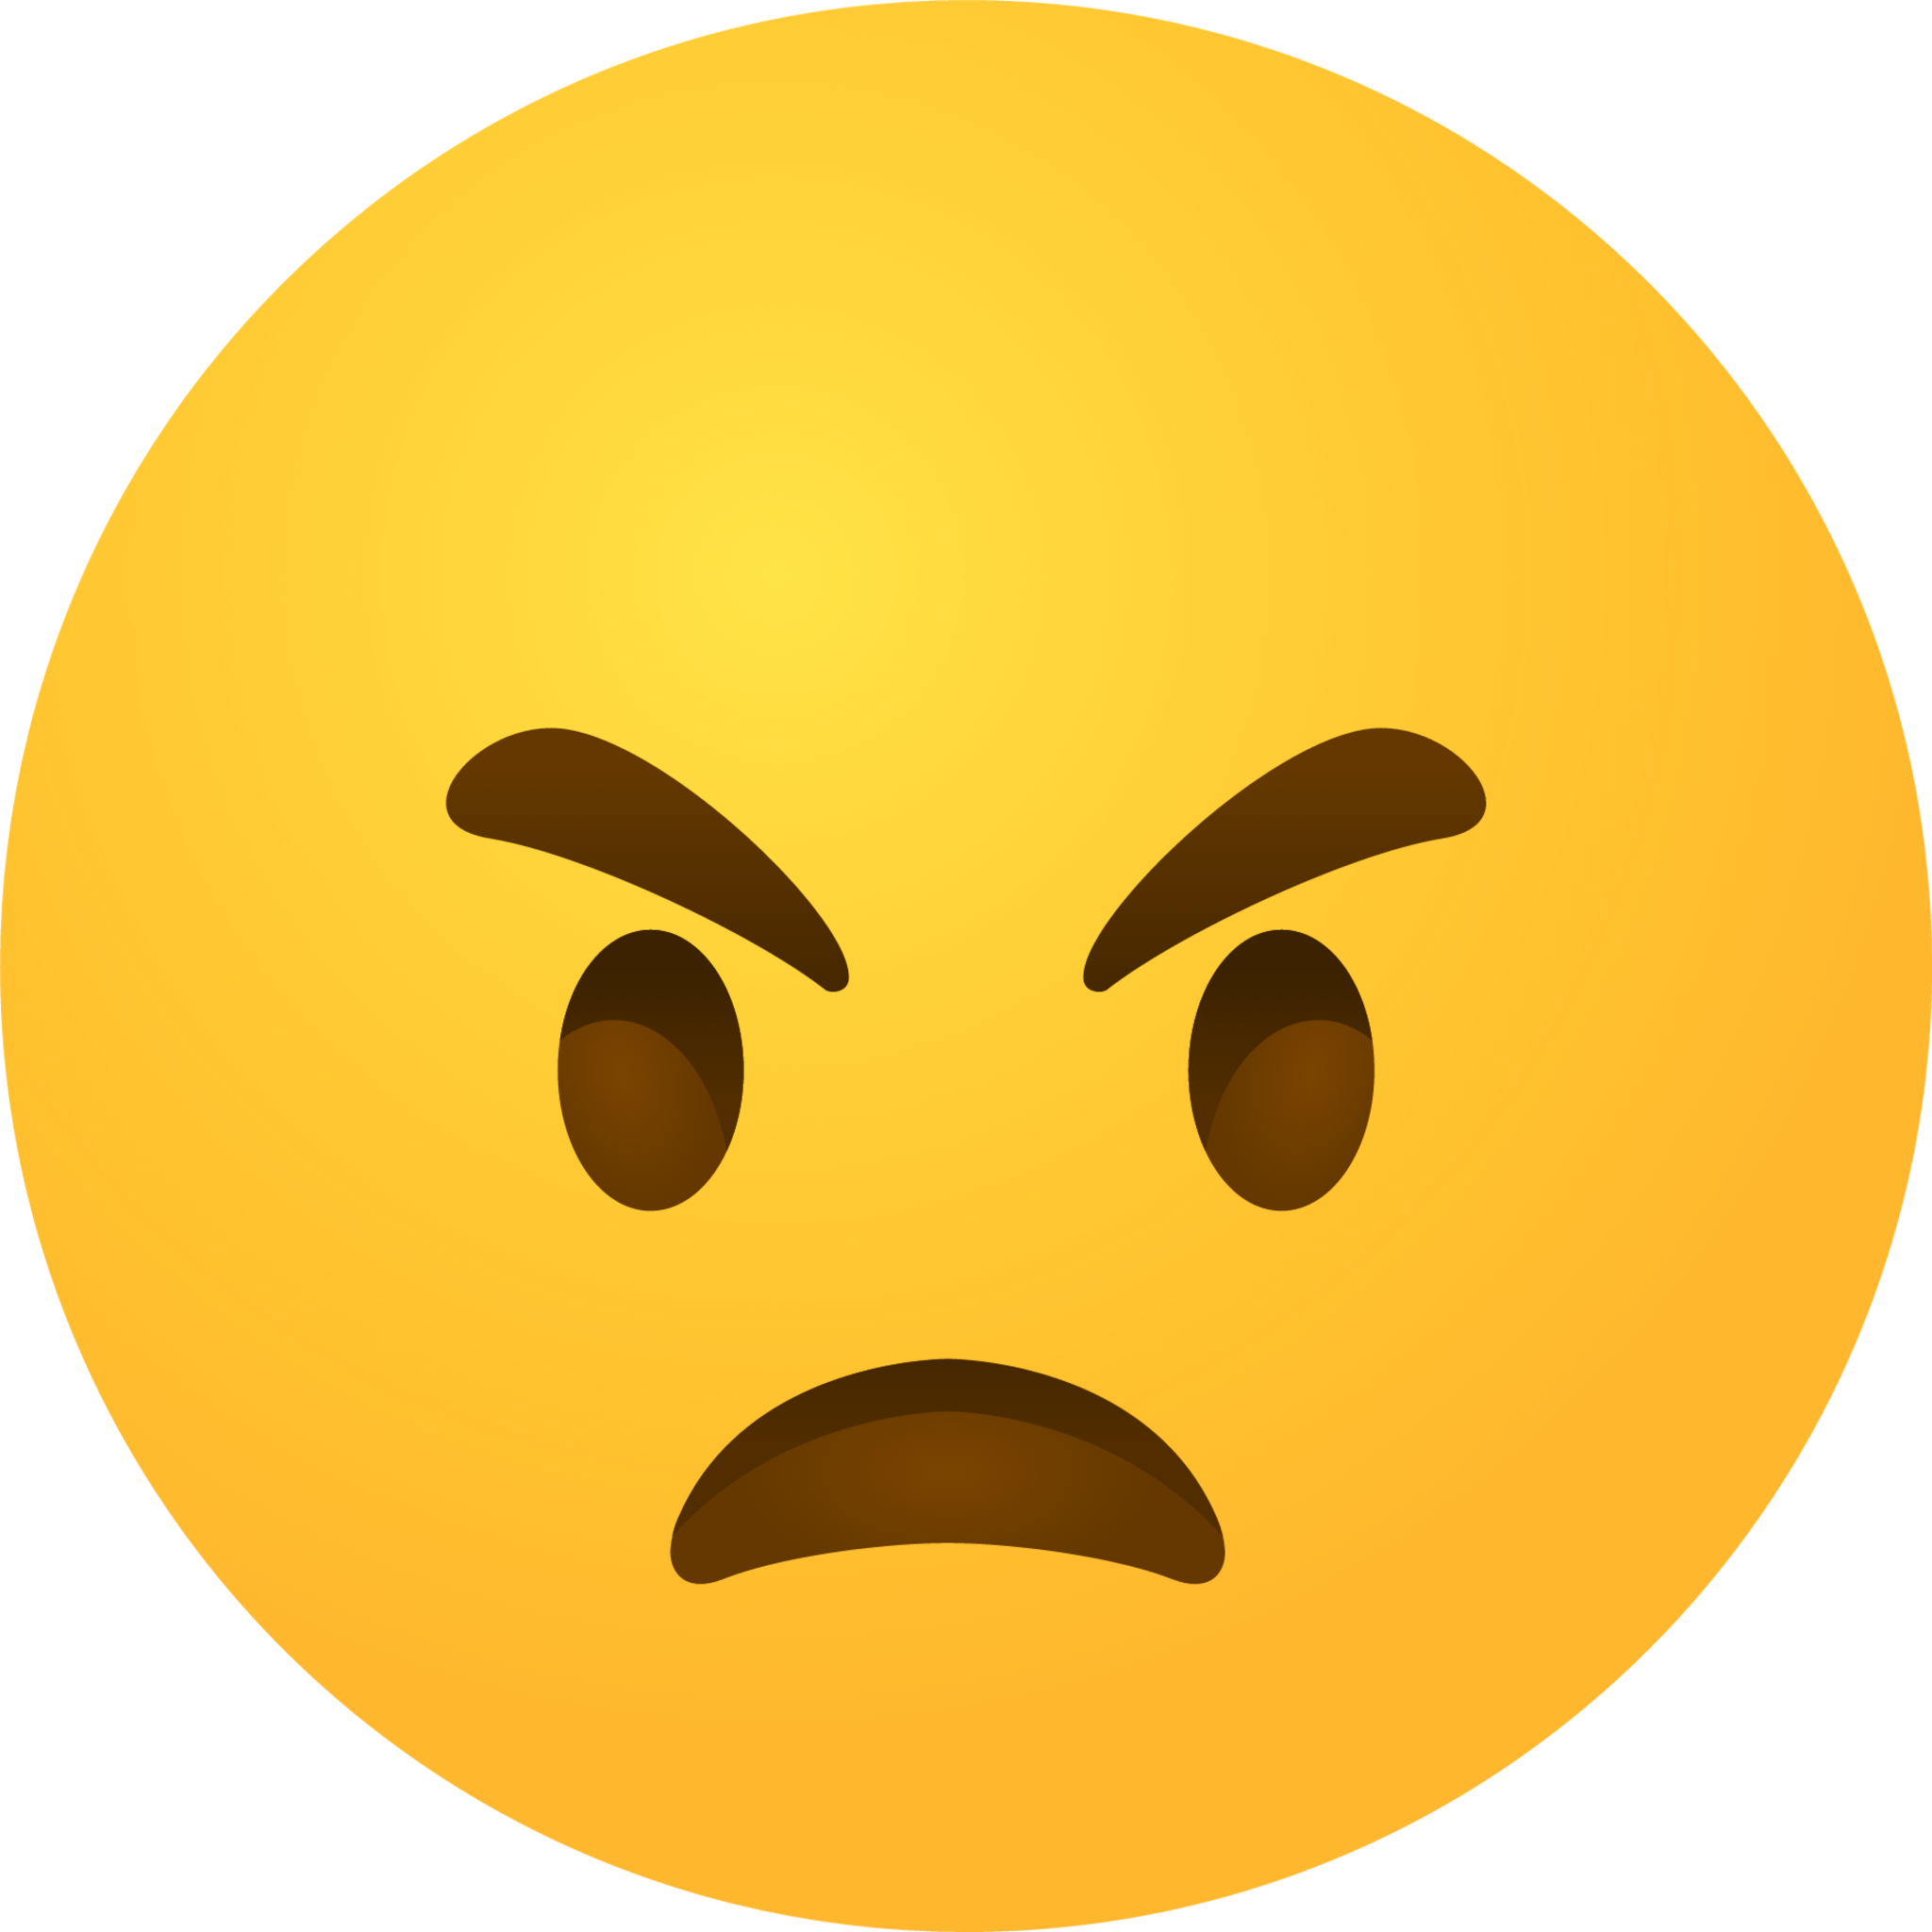 Angry Face Angry Face Emoji With Red Smiley Mouth CleanPNG Clip Art Library